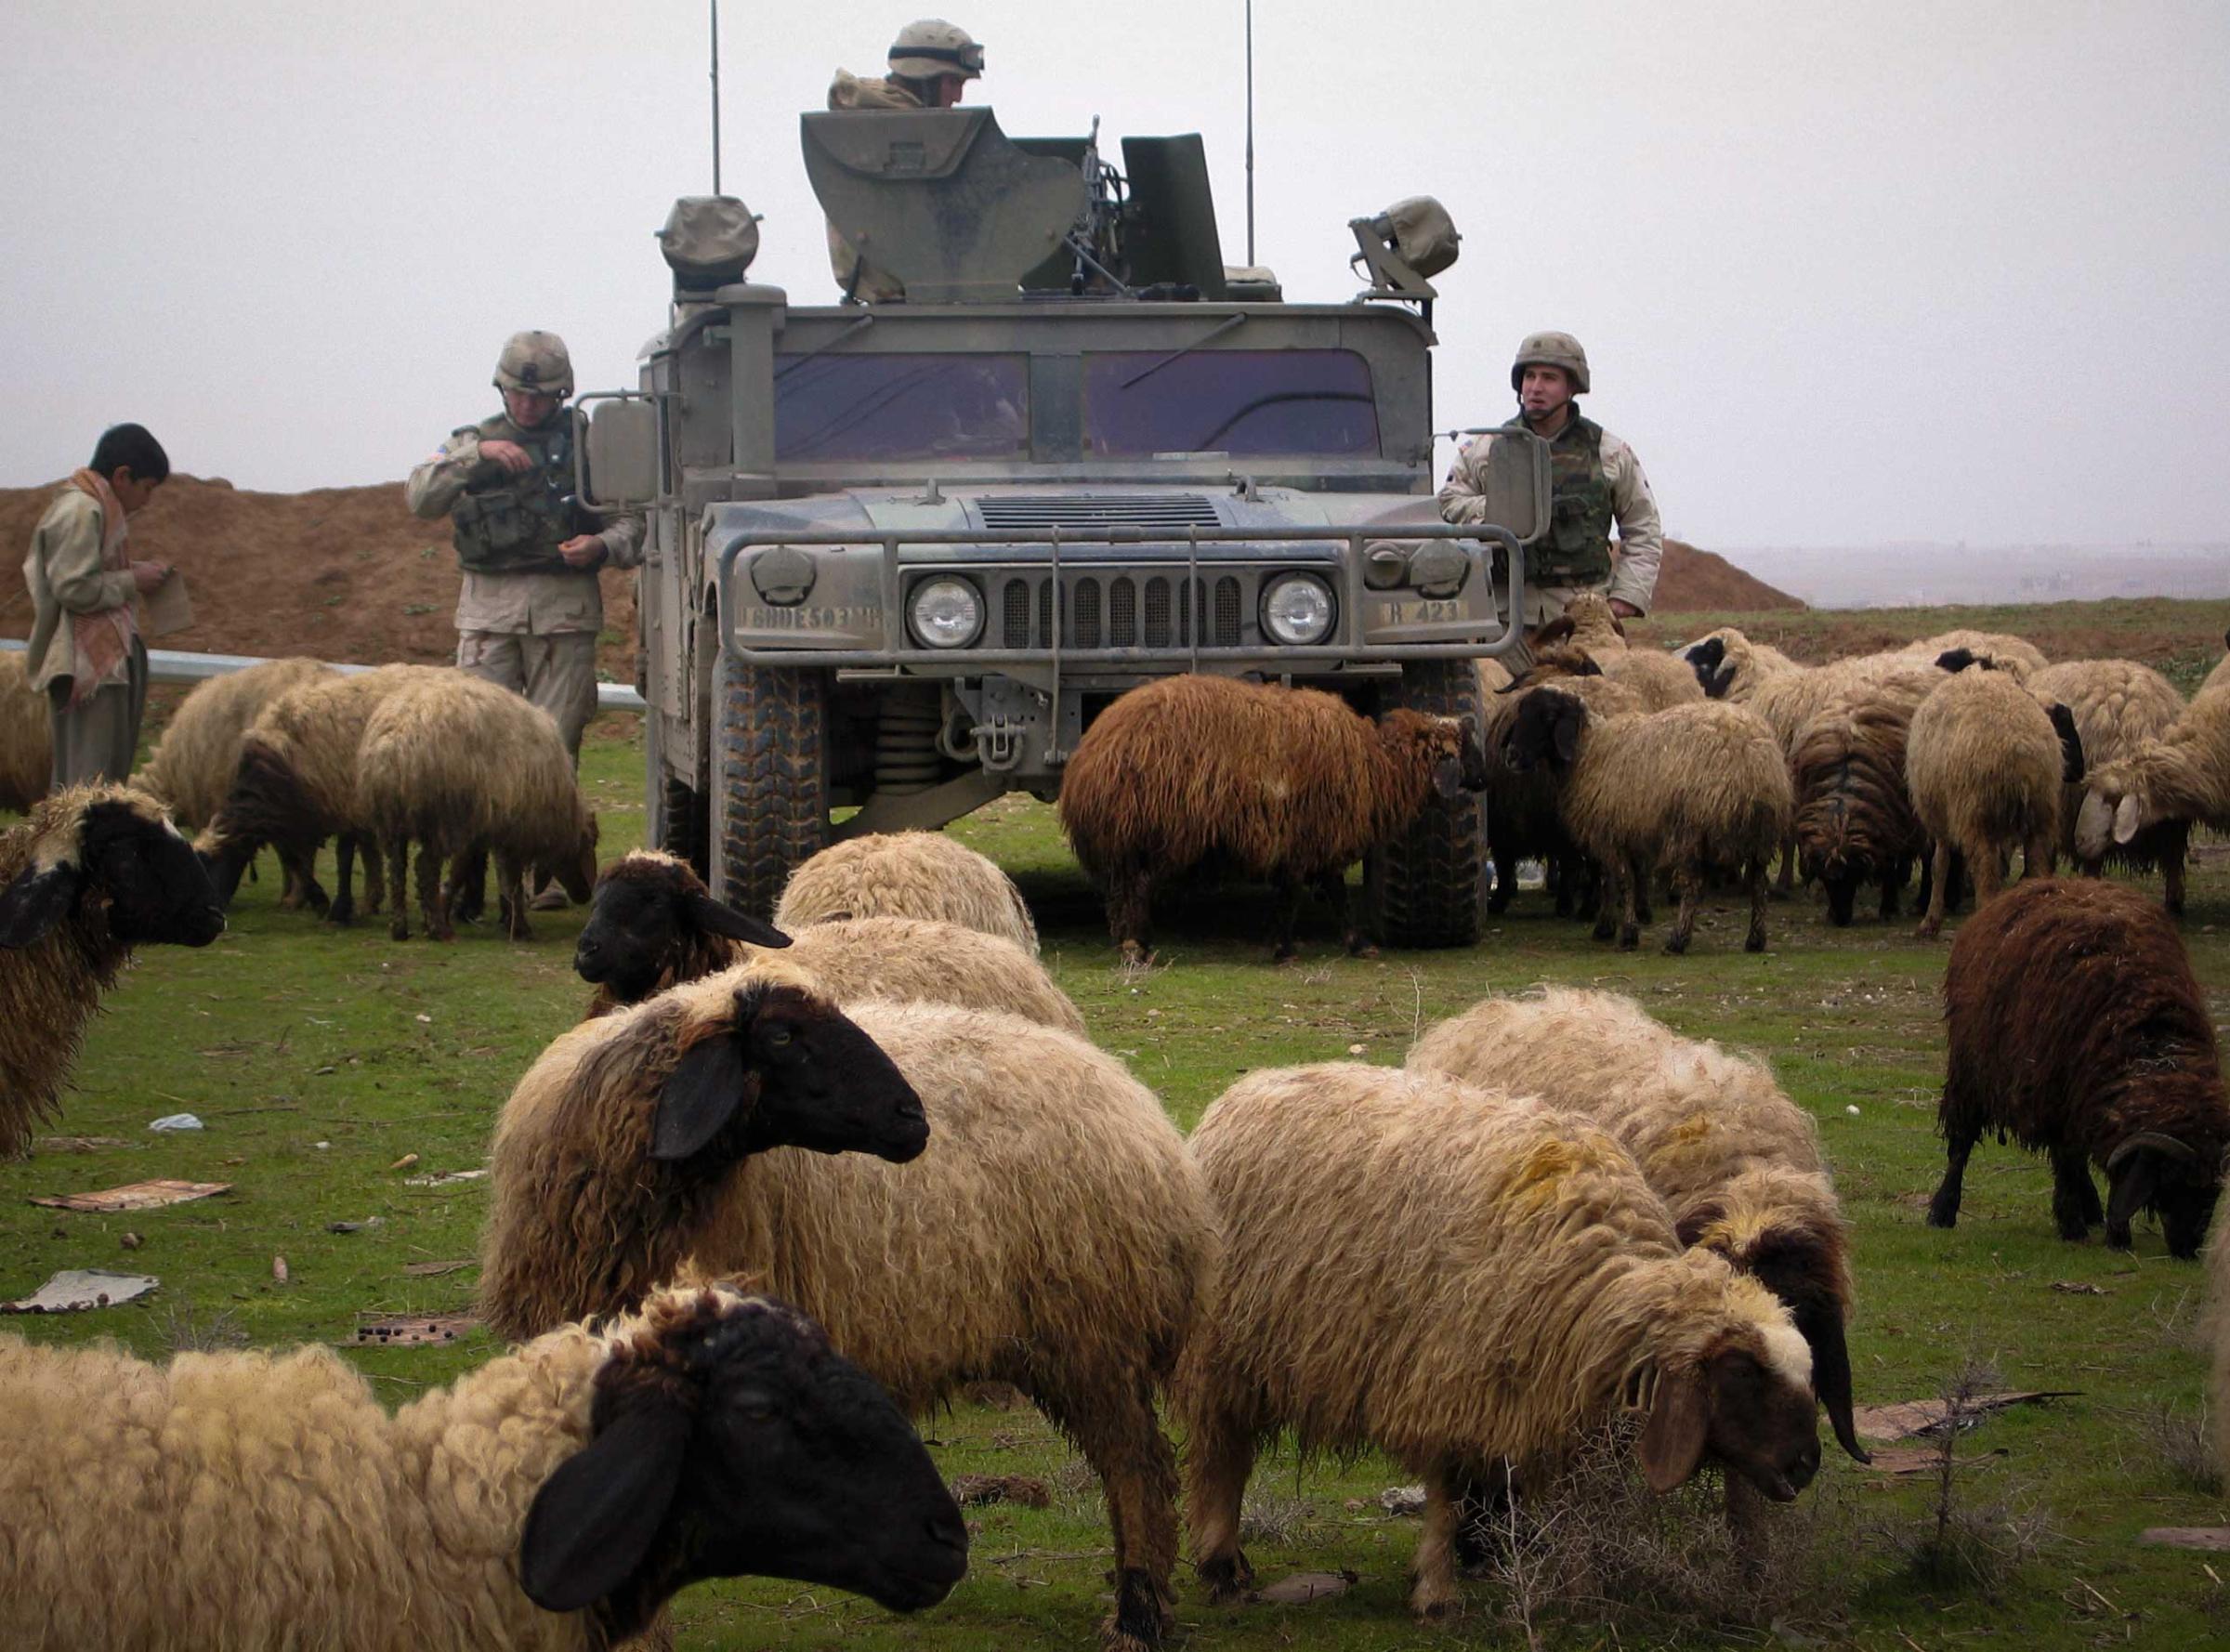 U.S. ARMY TROOPS ARE SURROUNDED BY SHEEP WHILE WATCHING RURAL AREA IN NORTHERN IRAQ.